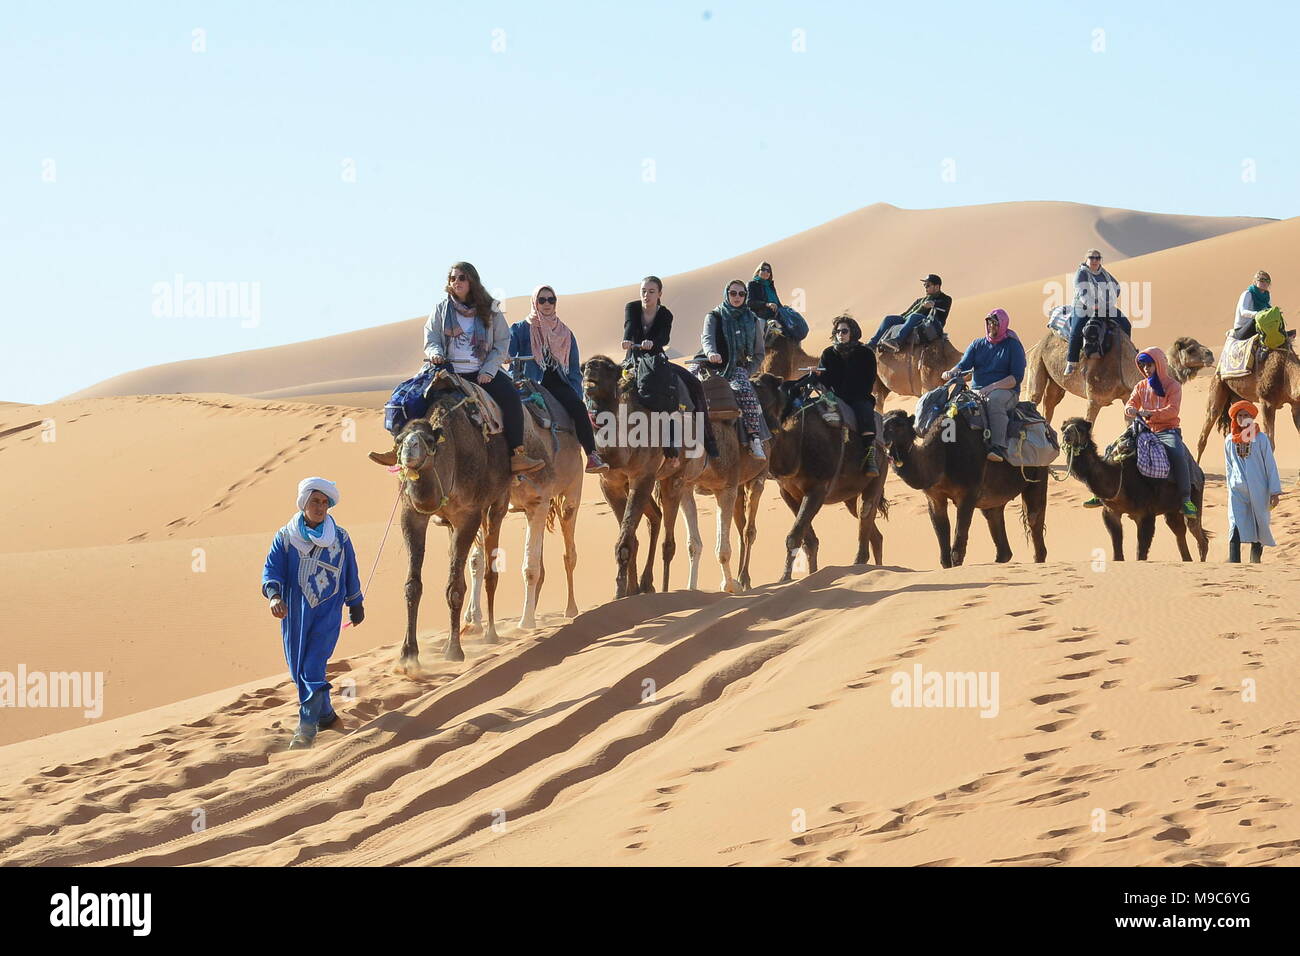 Merzouga, Morocco. 24th Mar, 2018. People ride camels in Merzouga, Morocco, on March 24, 2018. Tourists came to visit the small village of Merzouga for its proximity to Erg Chebbi, a Saharan erg. Credit: Aissa/Xinhua/Alamy Live News Stock Photo